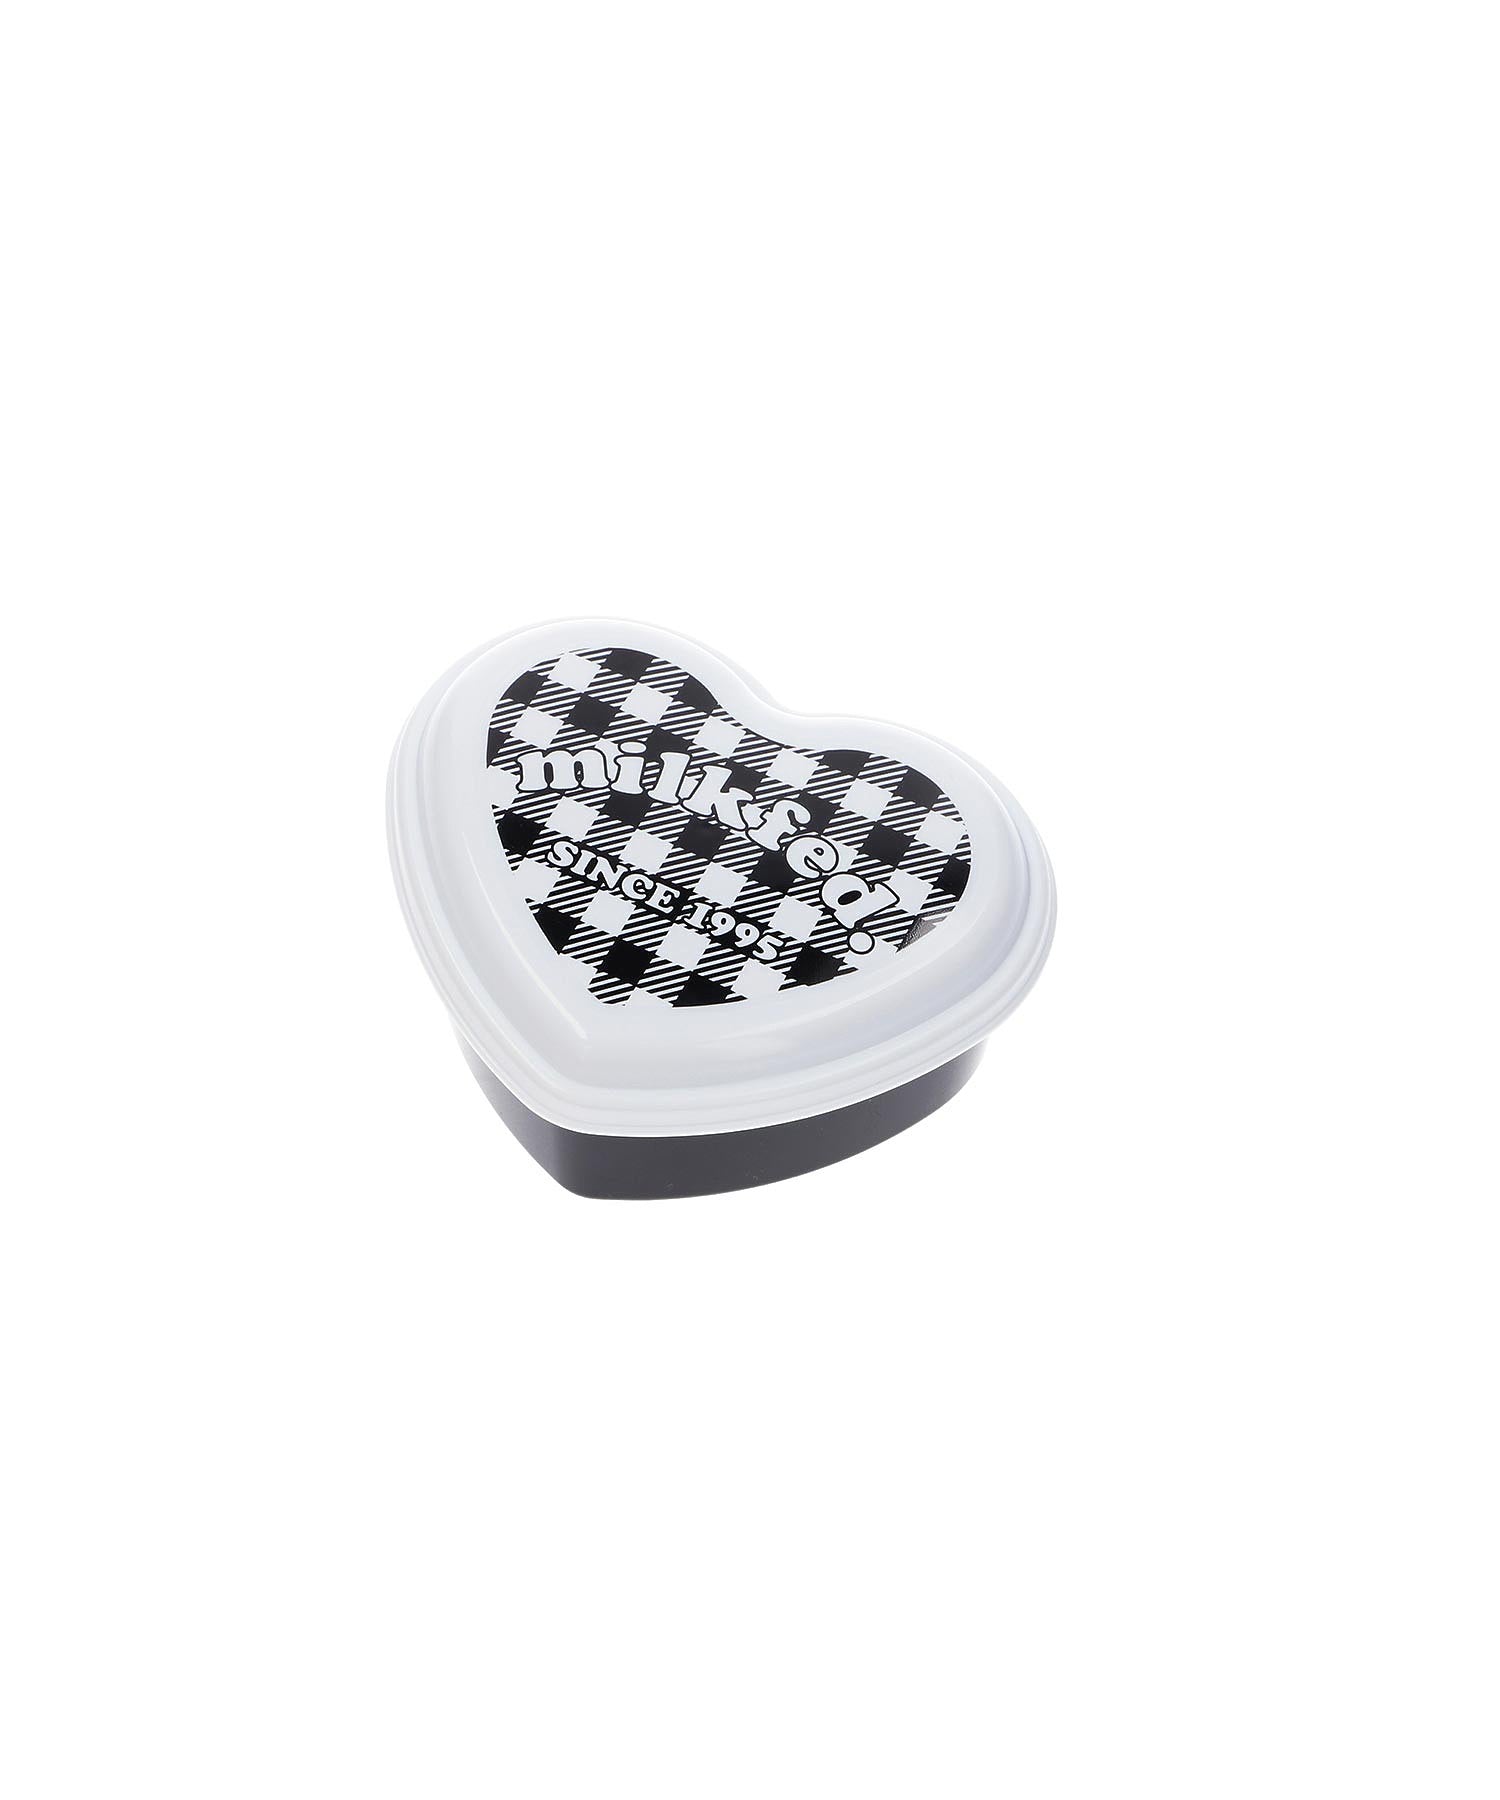 GINGHAM FOOD CONTAINER SET